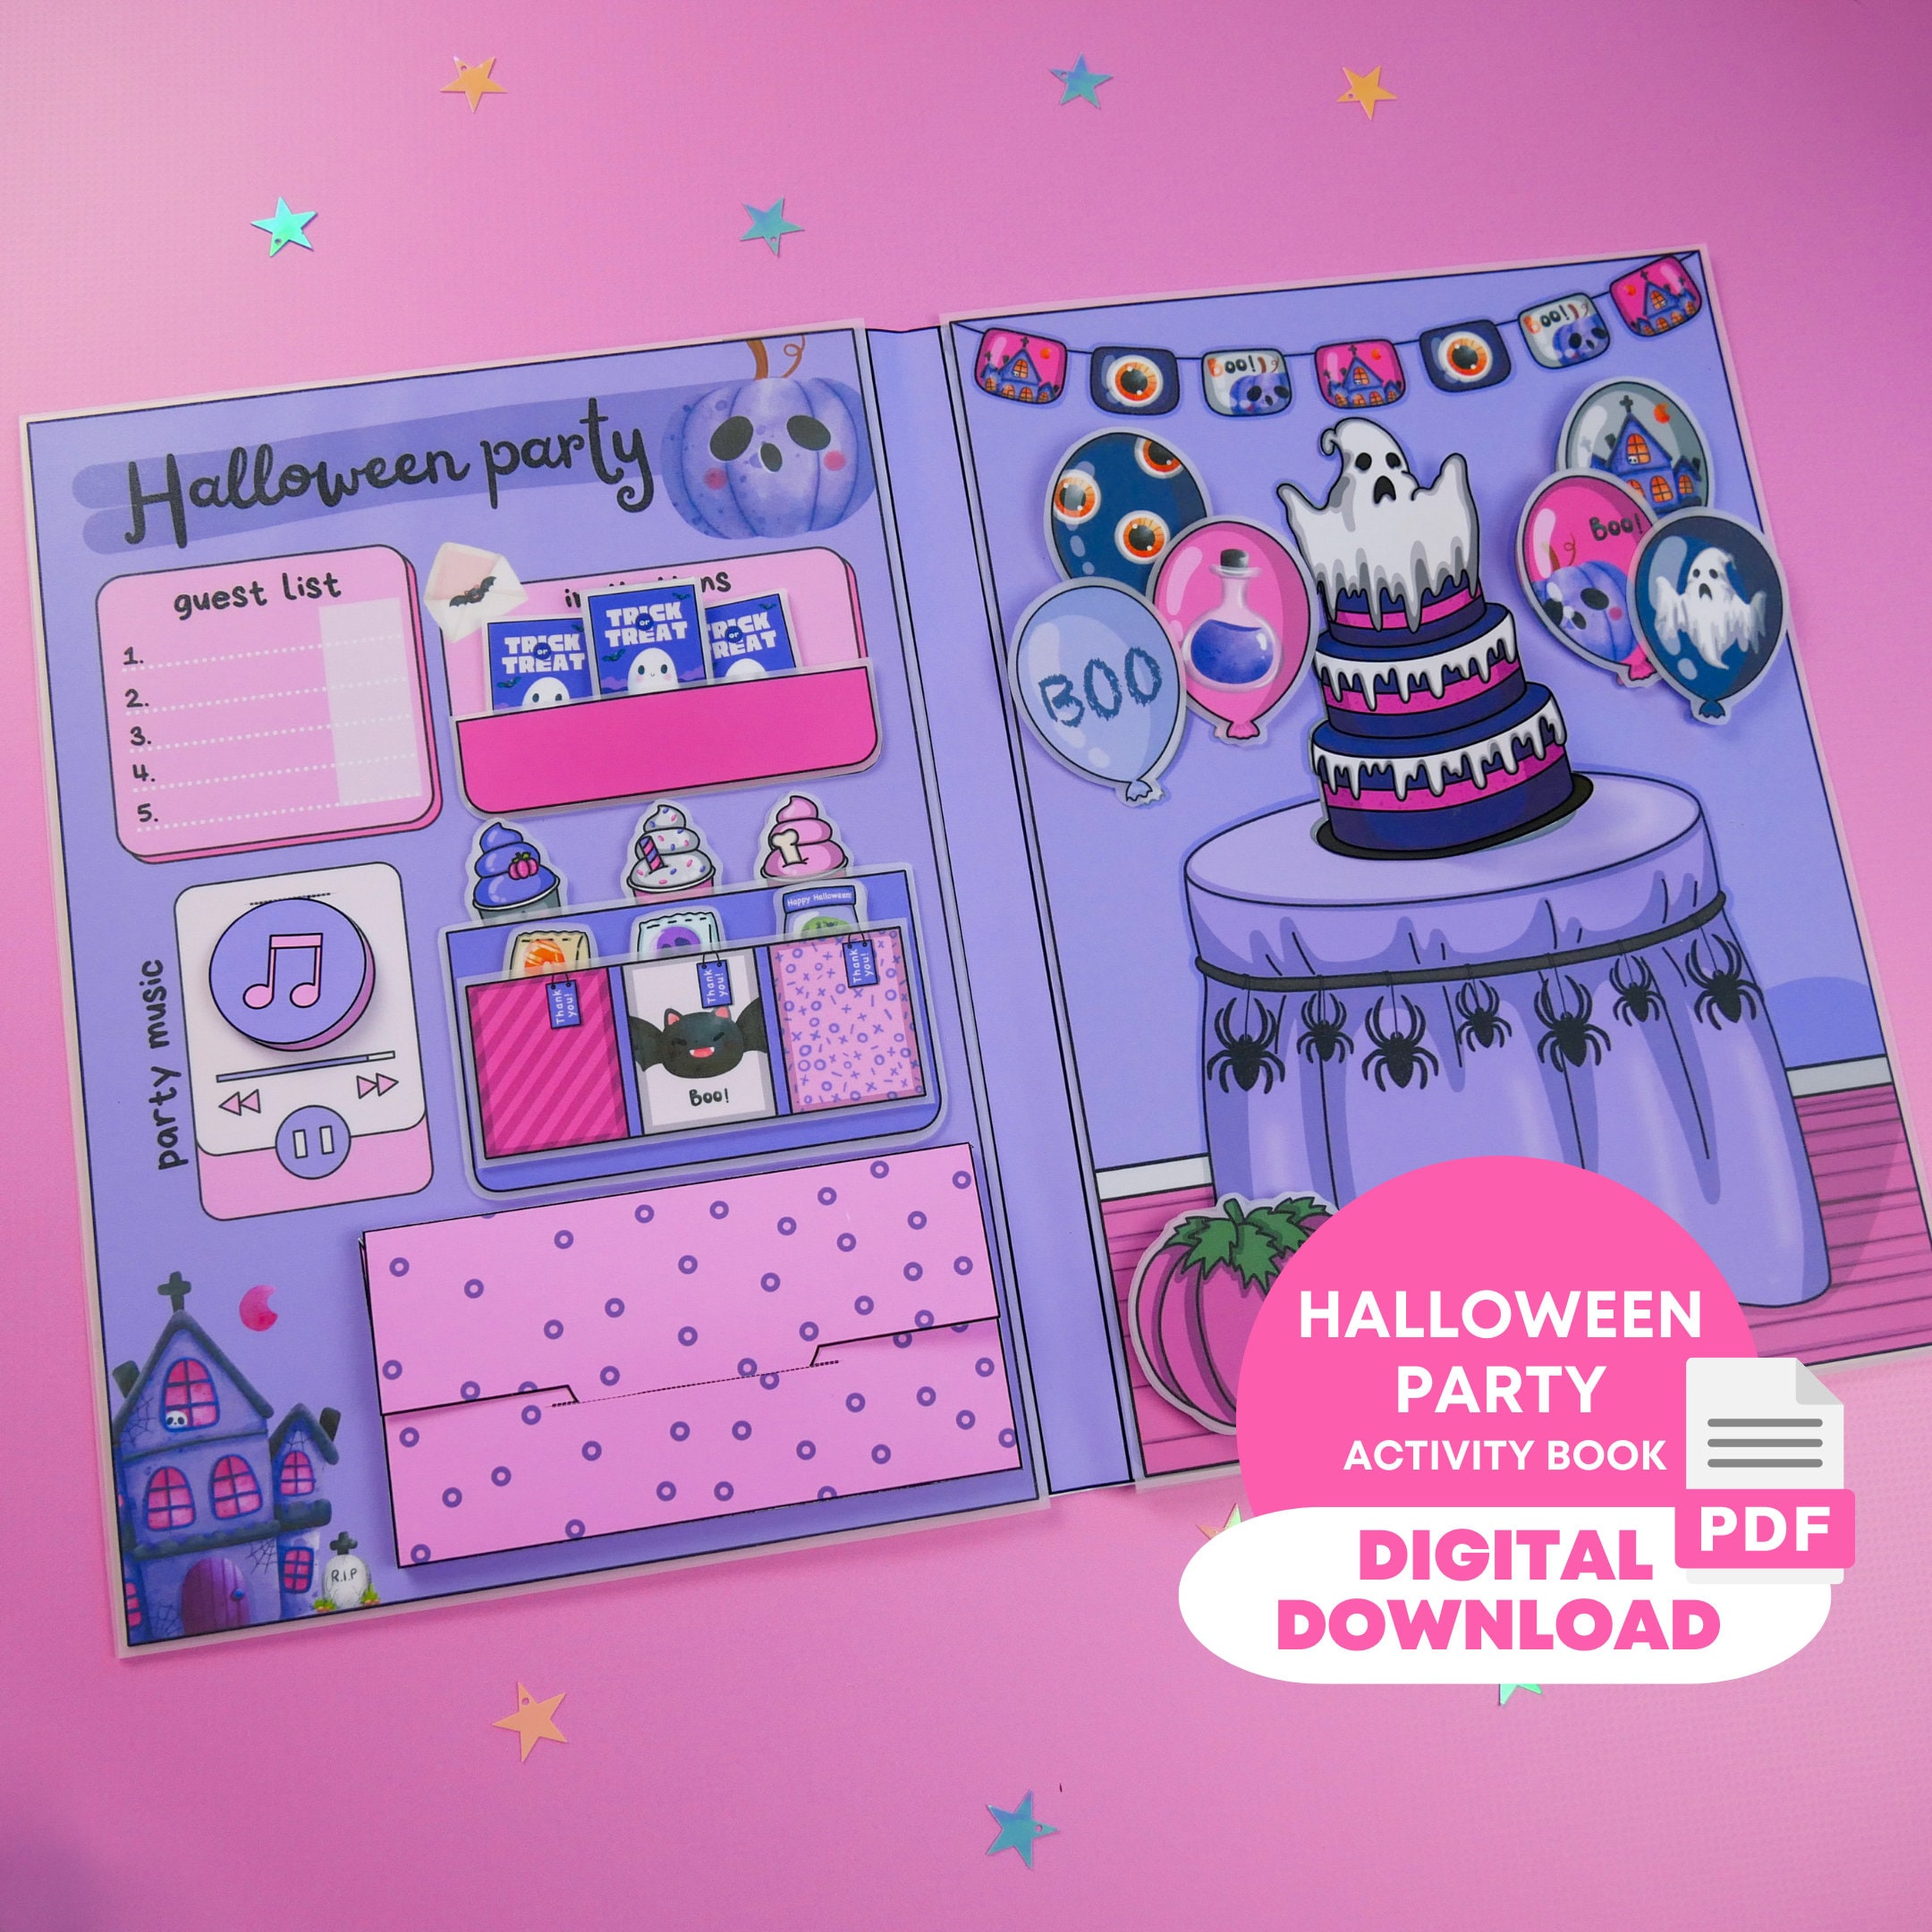 Halloween Flip Book  Paper and Digital Versions by The Sweet Life of  Primary